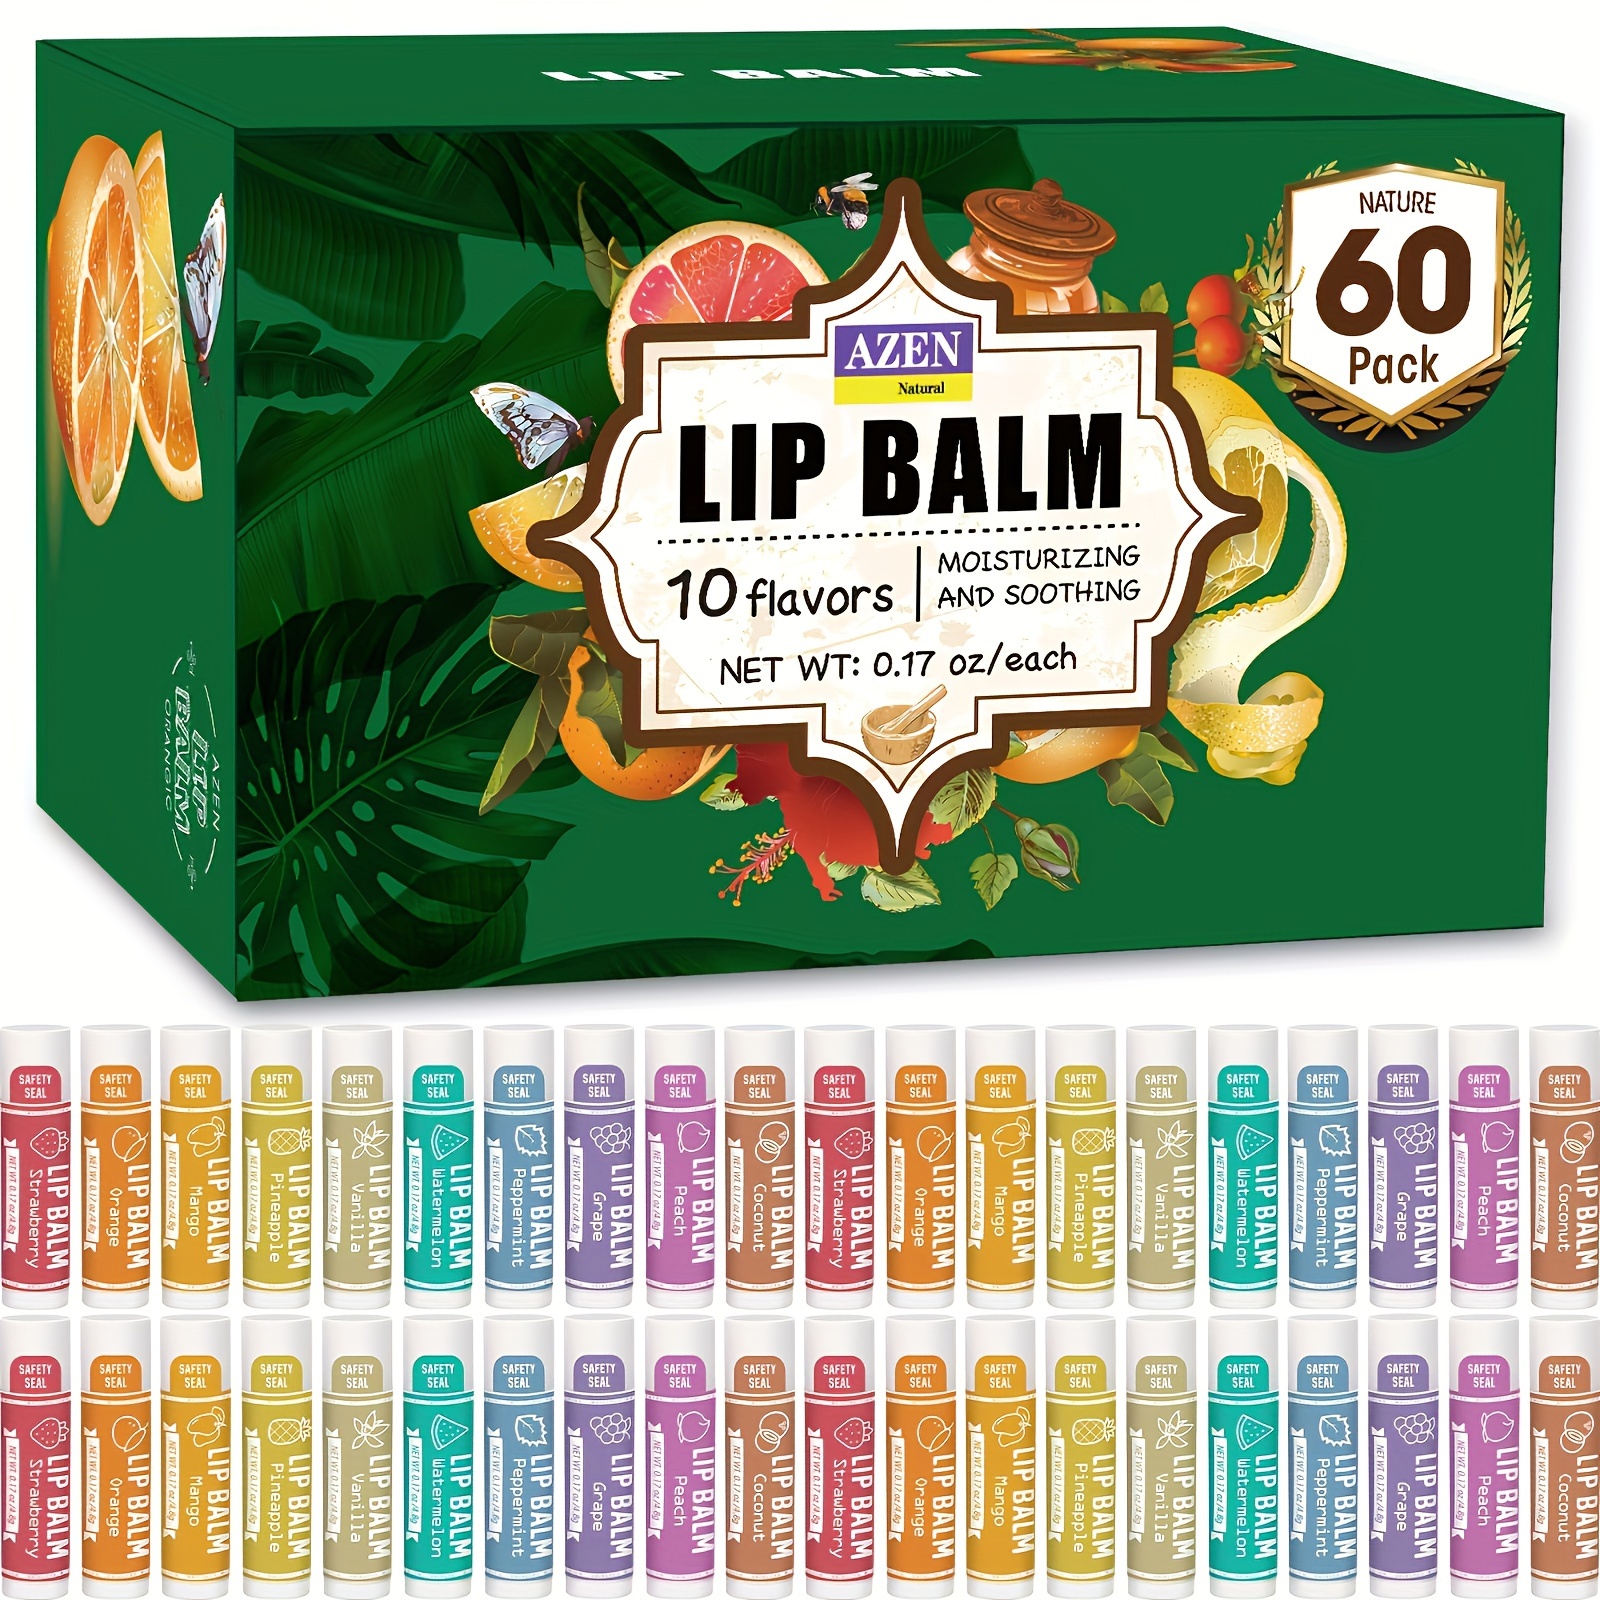 

60pcs/set, Lip Balm Gift Set, Moisturizers With 10 Flavors, Beeswax & Coconut Oil-based Lip Care, Lip Oil Gift Set For Women, Ideal For Party Favors & Souvenirs